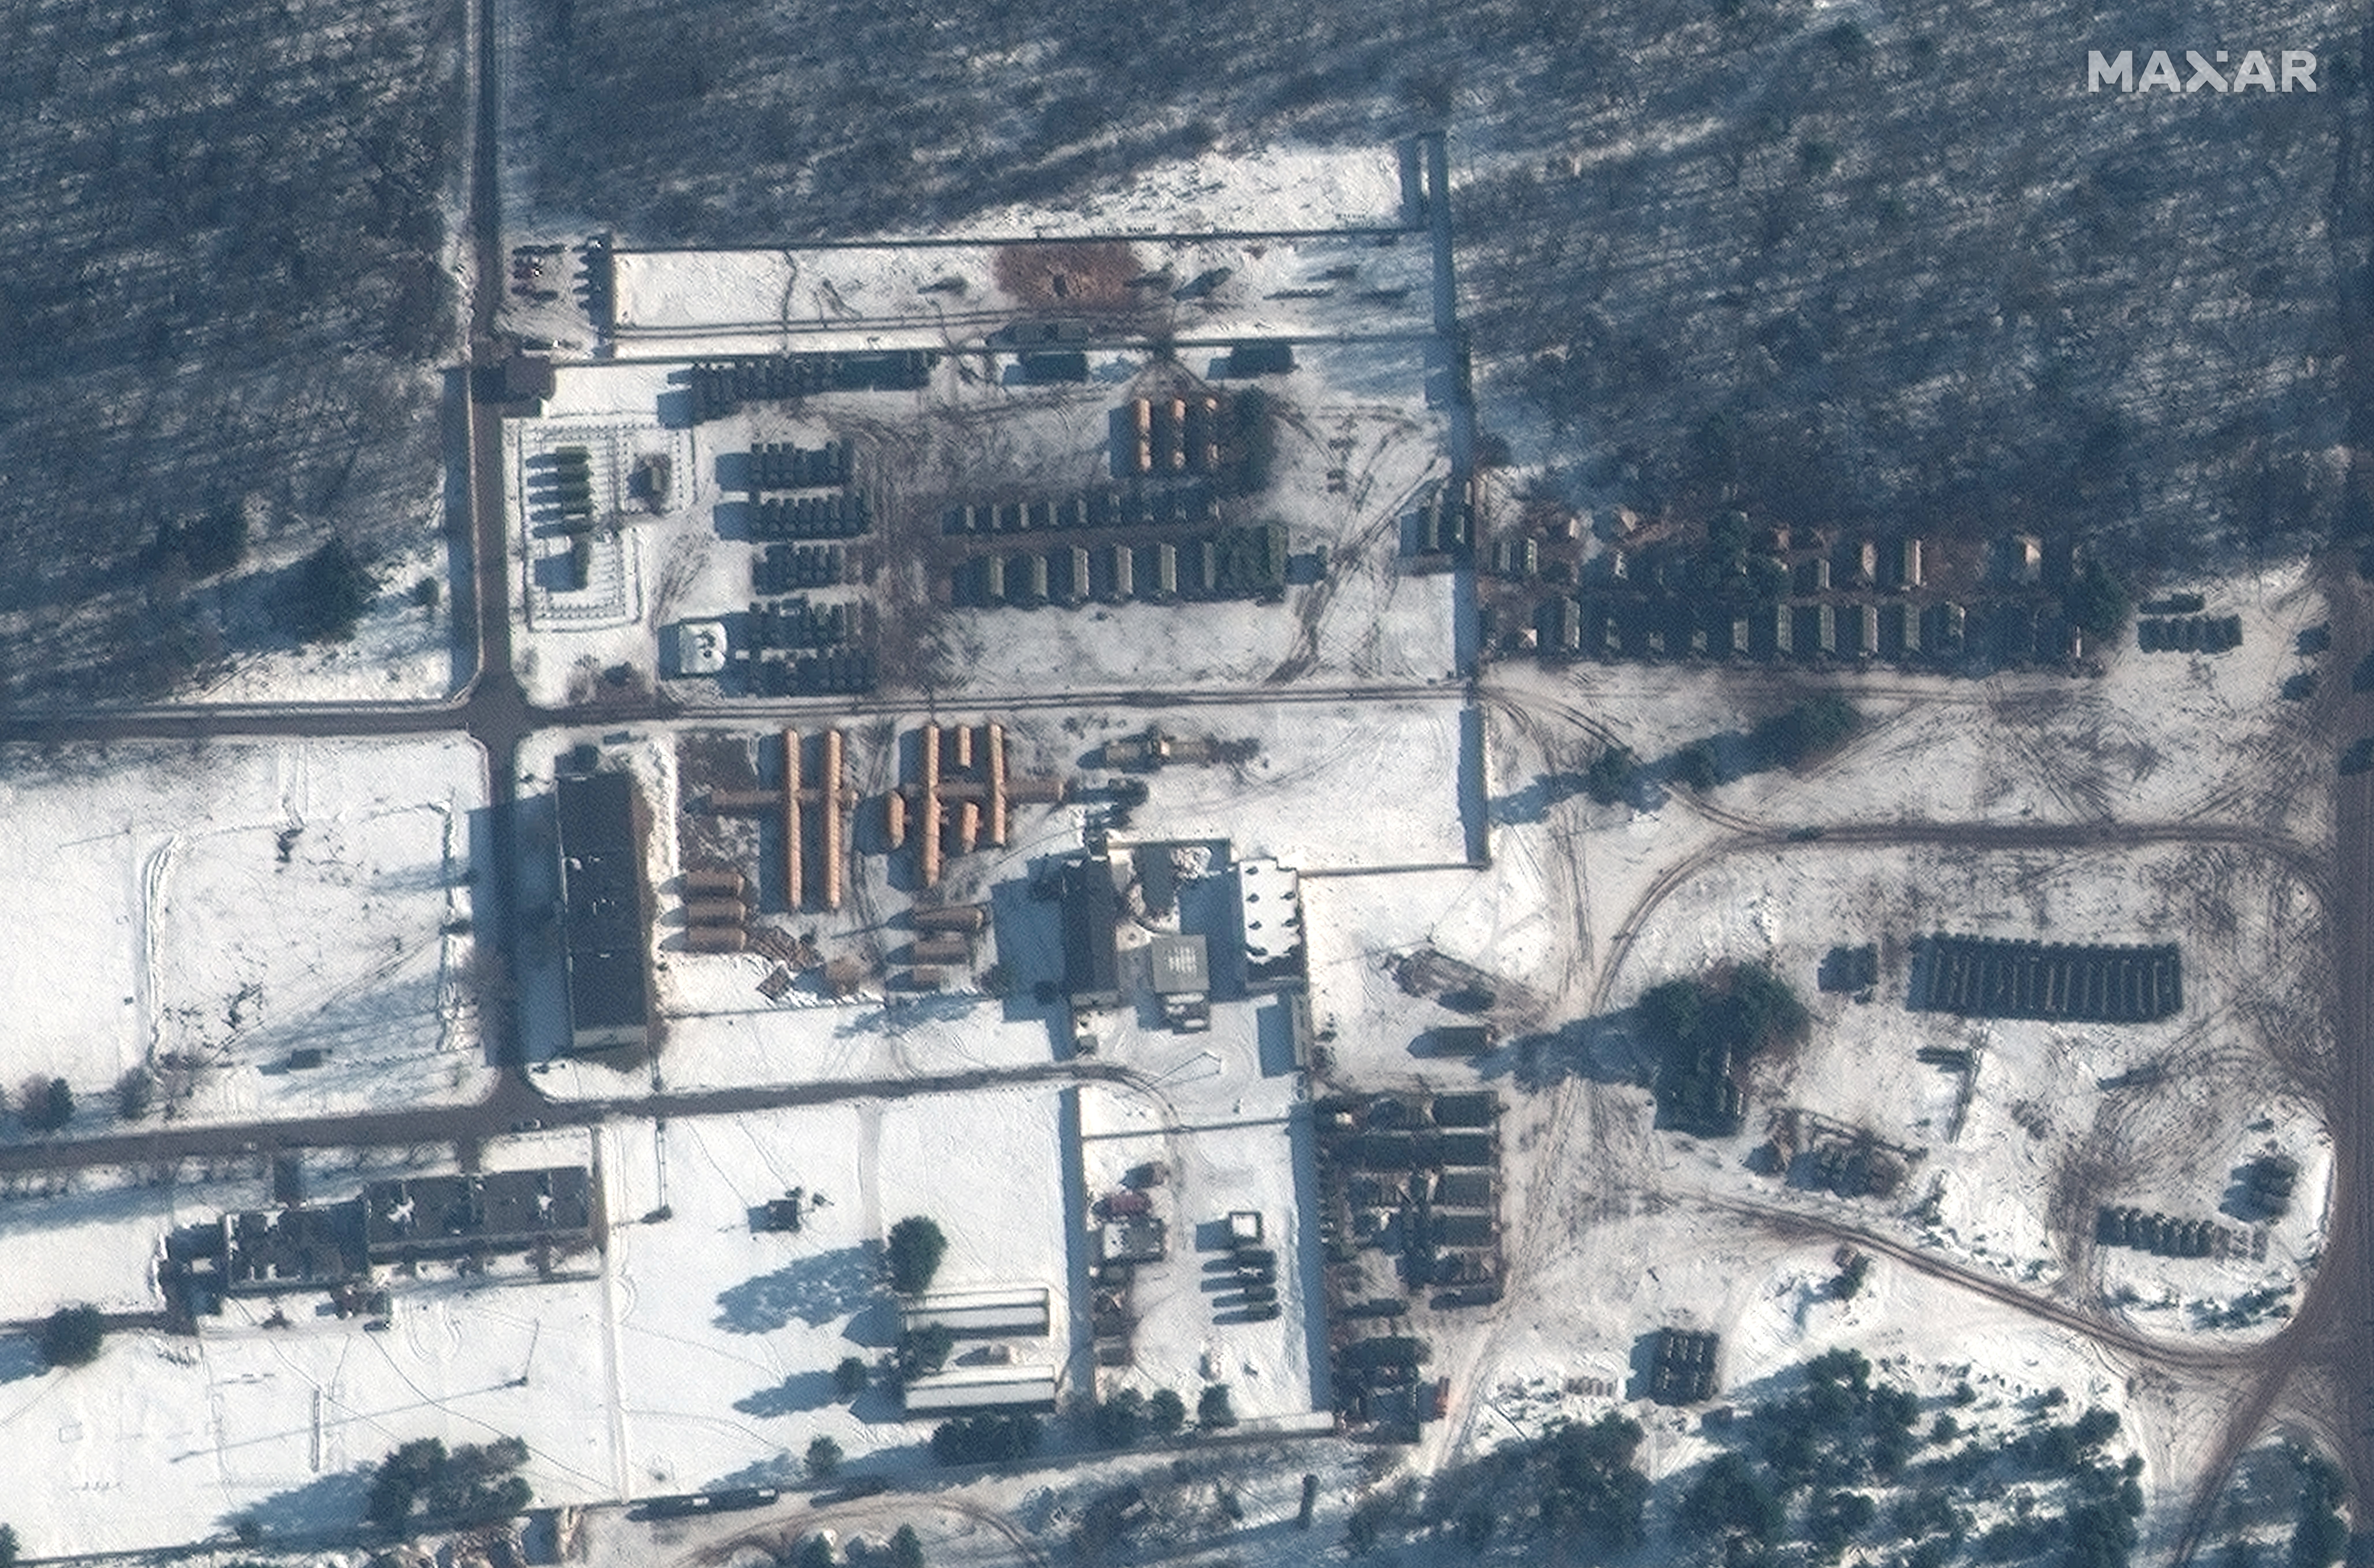 A satellite image shows a close up of a field hospital at the Osipovichi training area